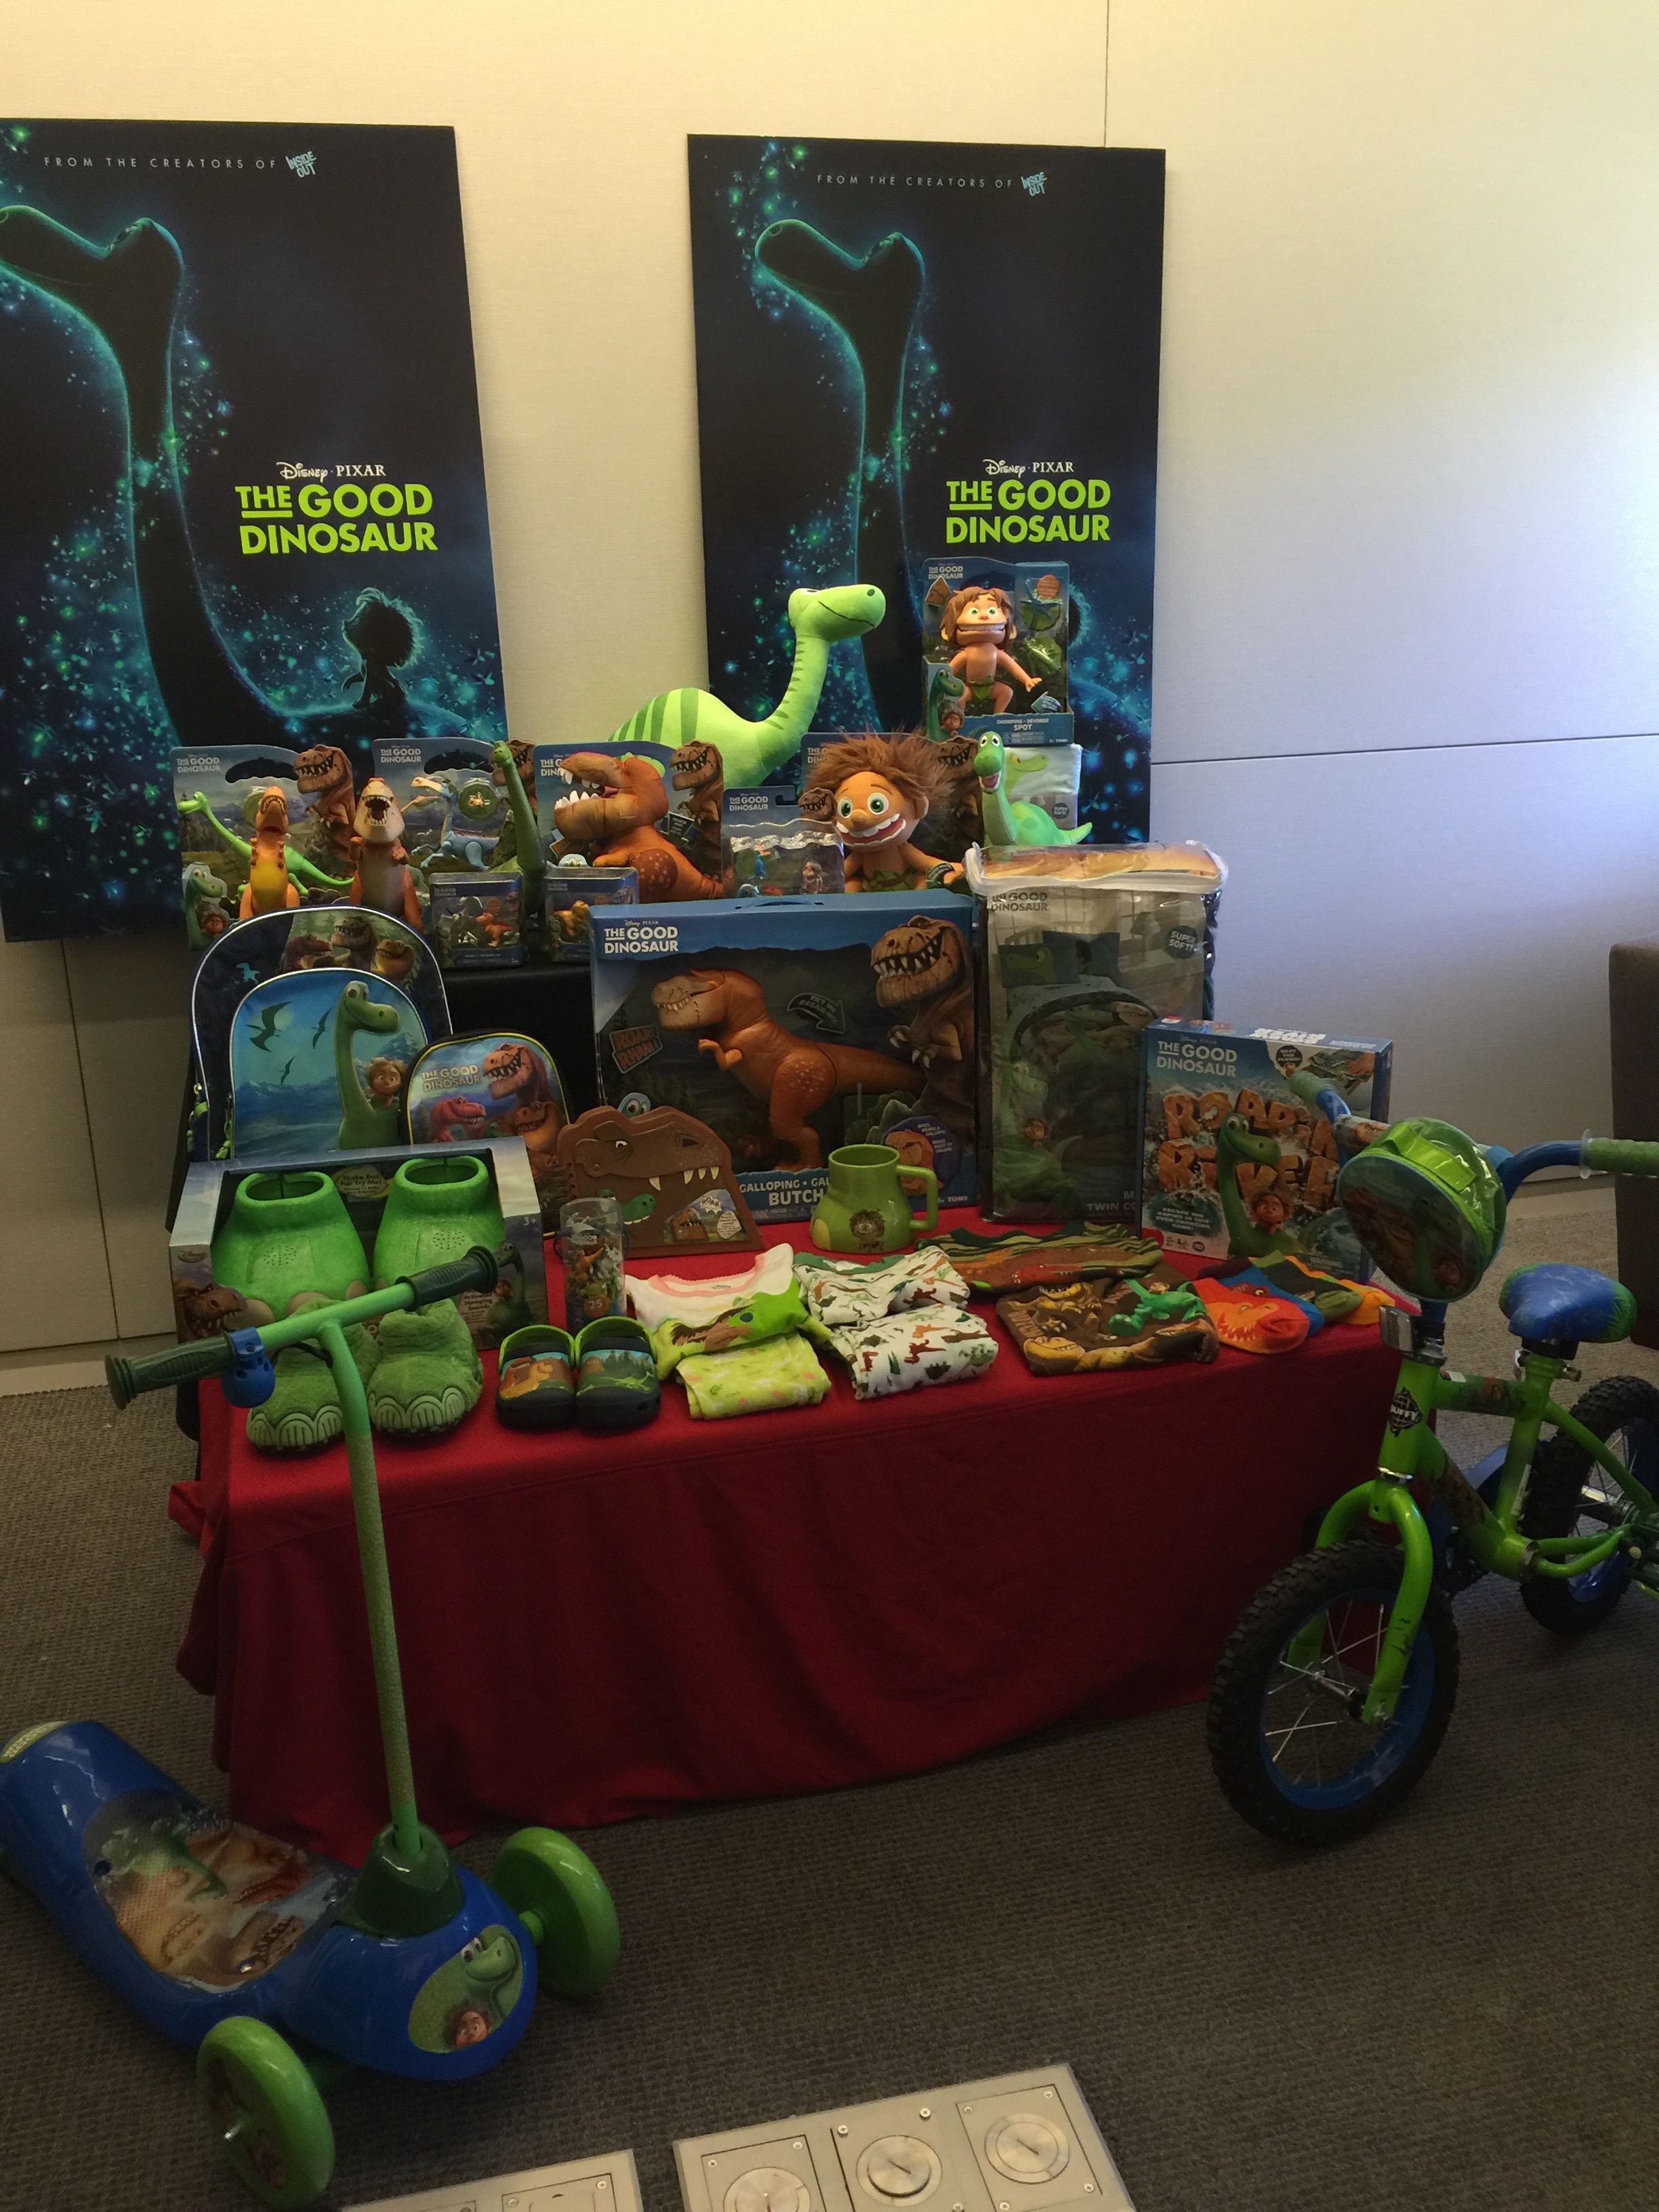 During our Good Dinosaur press trip, we were able to get a peak at Disney Infinity 3.0 and some of the fun toys and merchandise now available for The Good Dinosaur. #GoodDinoEvent